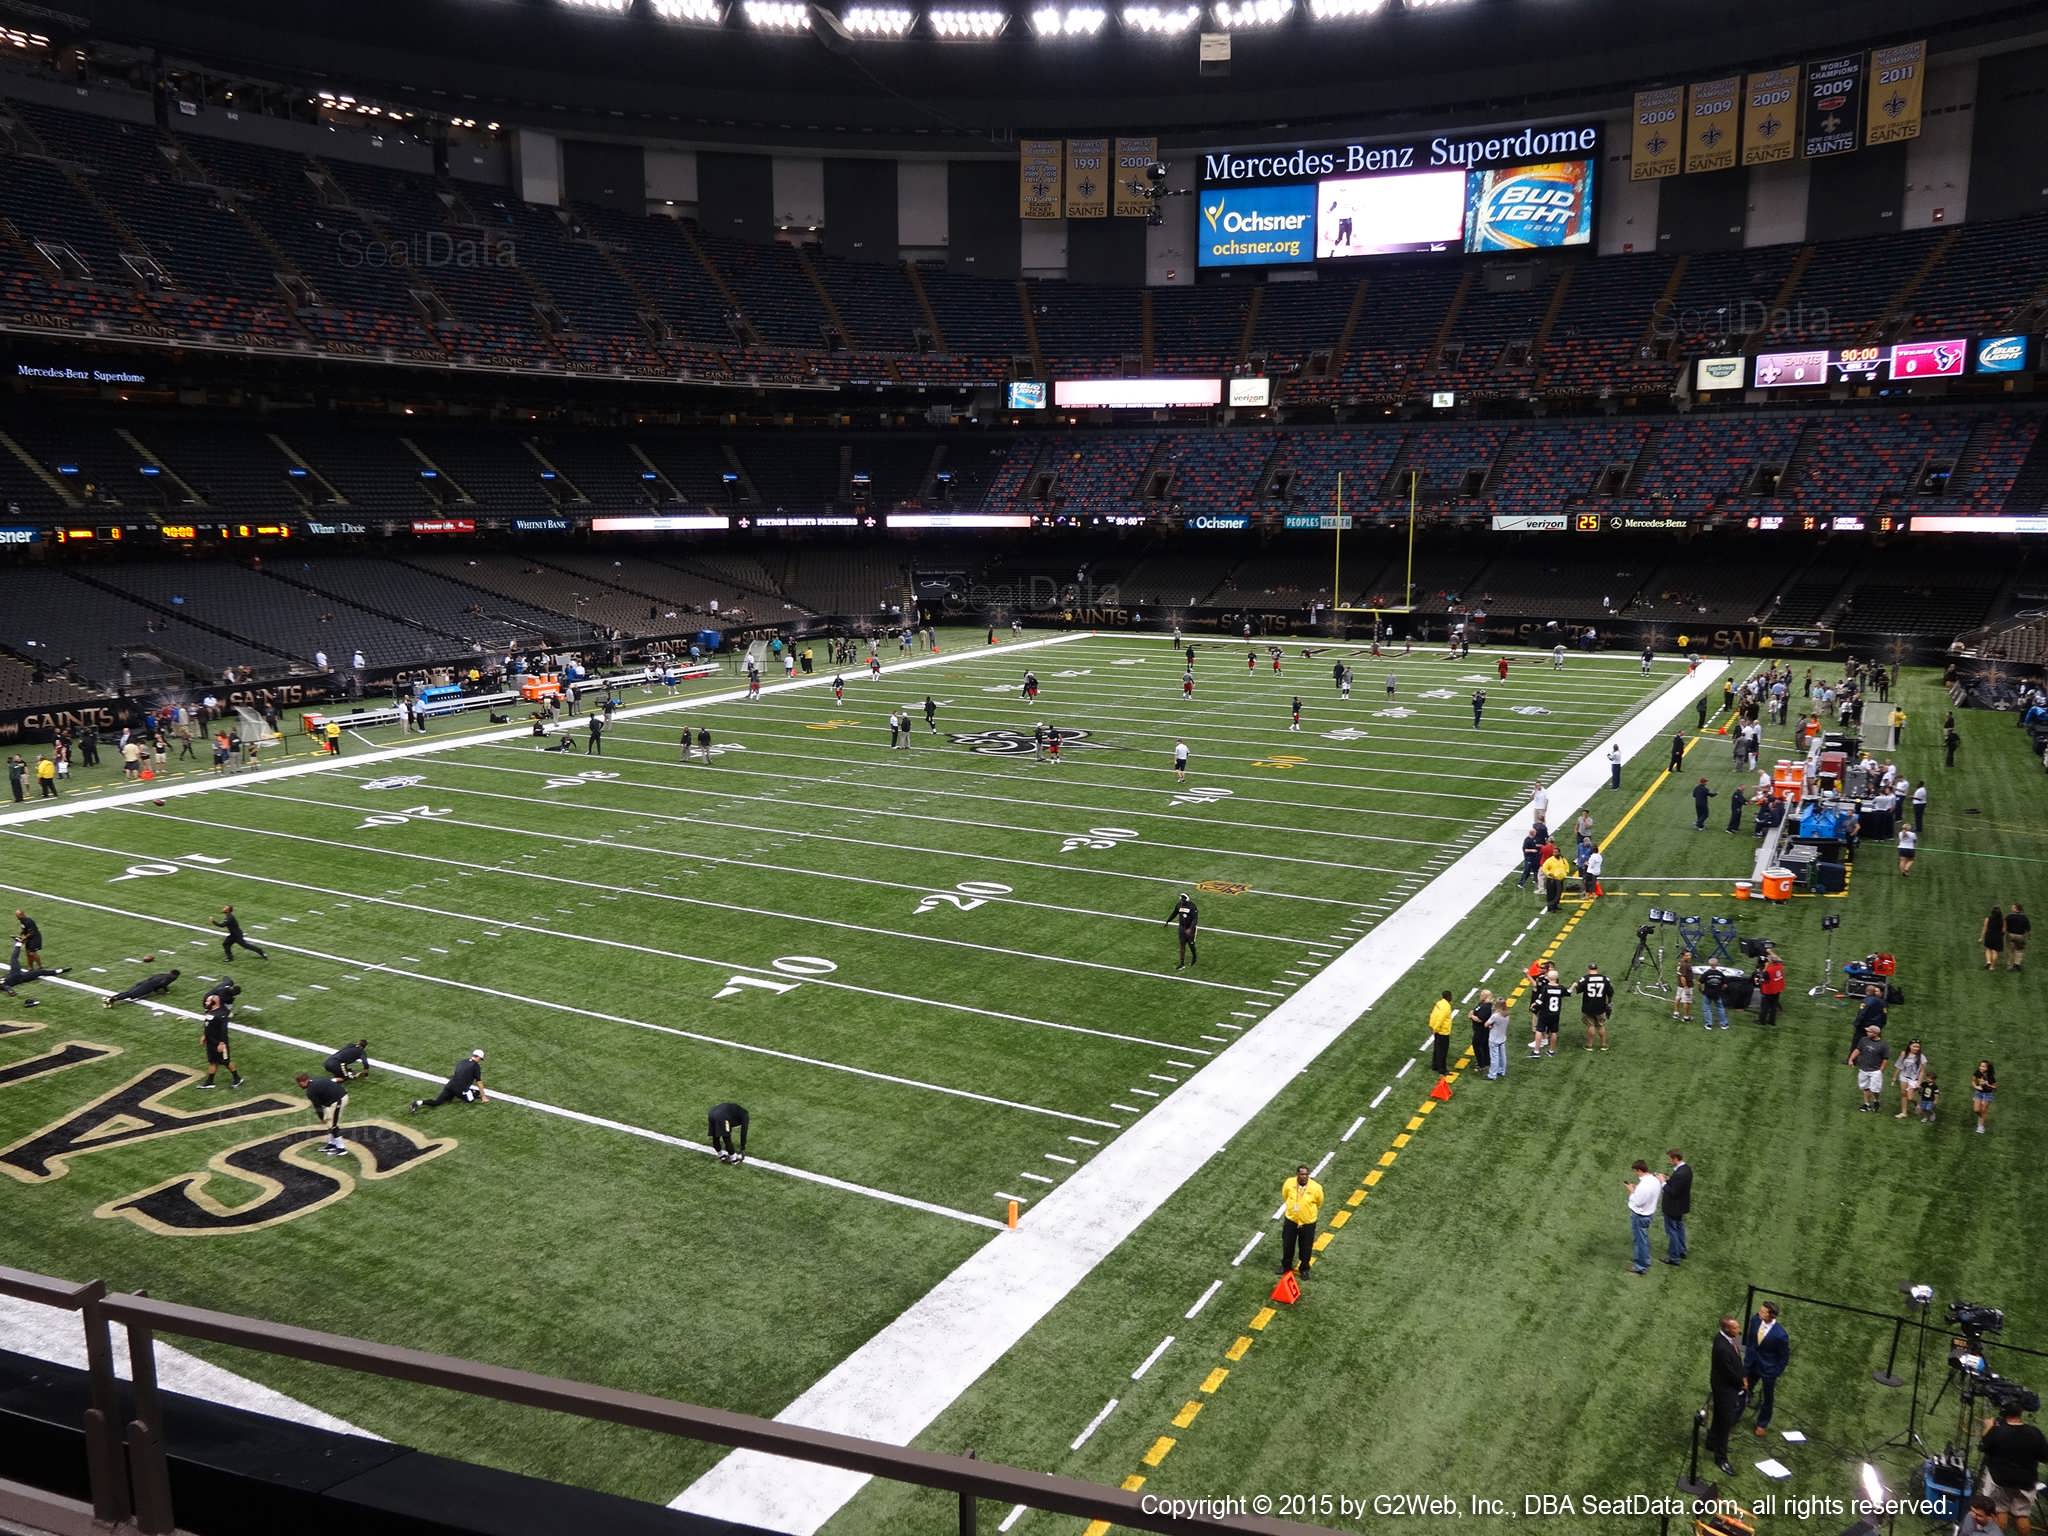 Seat view from section 235 at the Mercedes-Benz Superdome, home of the New Orleans Saints